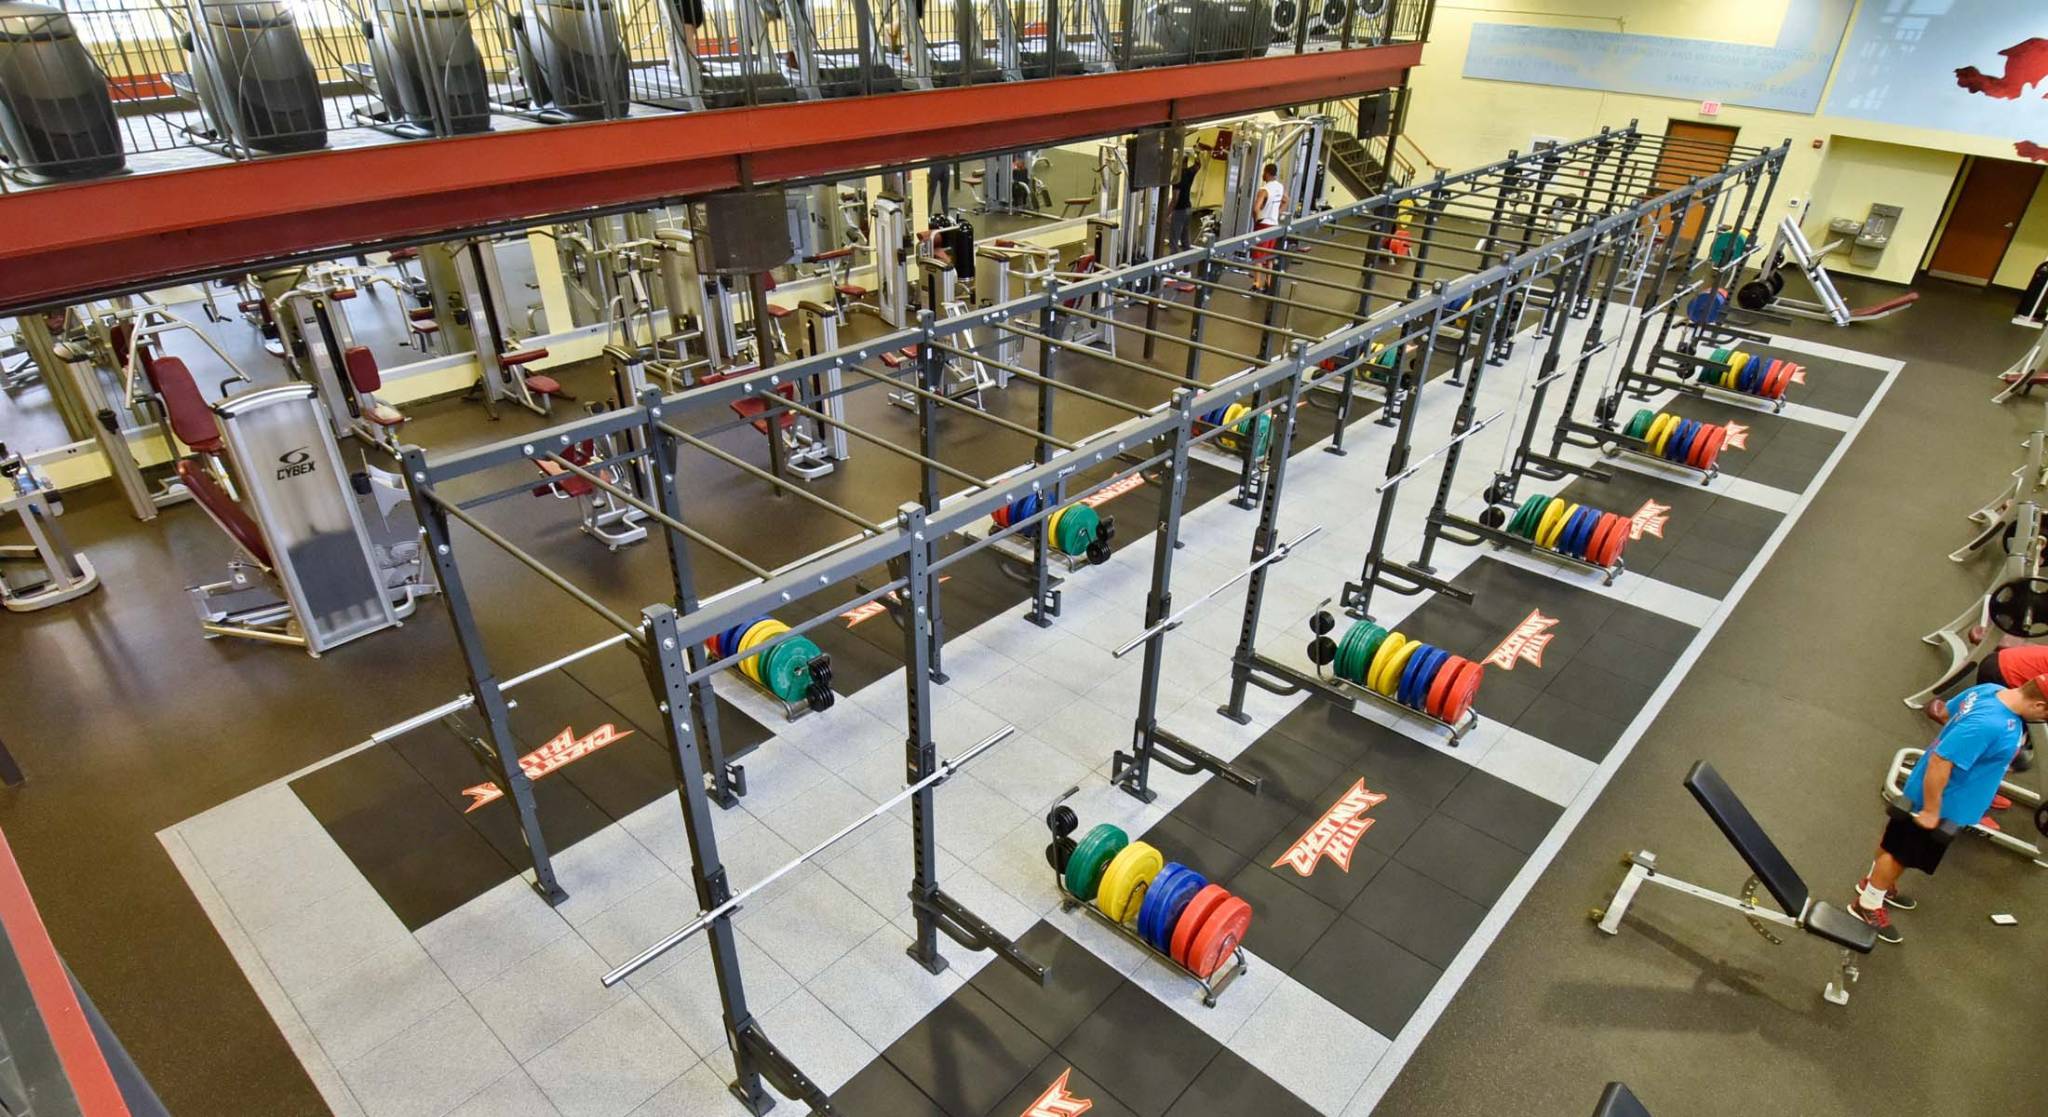 X-Racks featured in The National Fitness Trade Journal